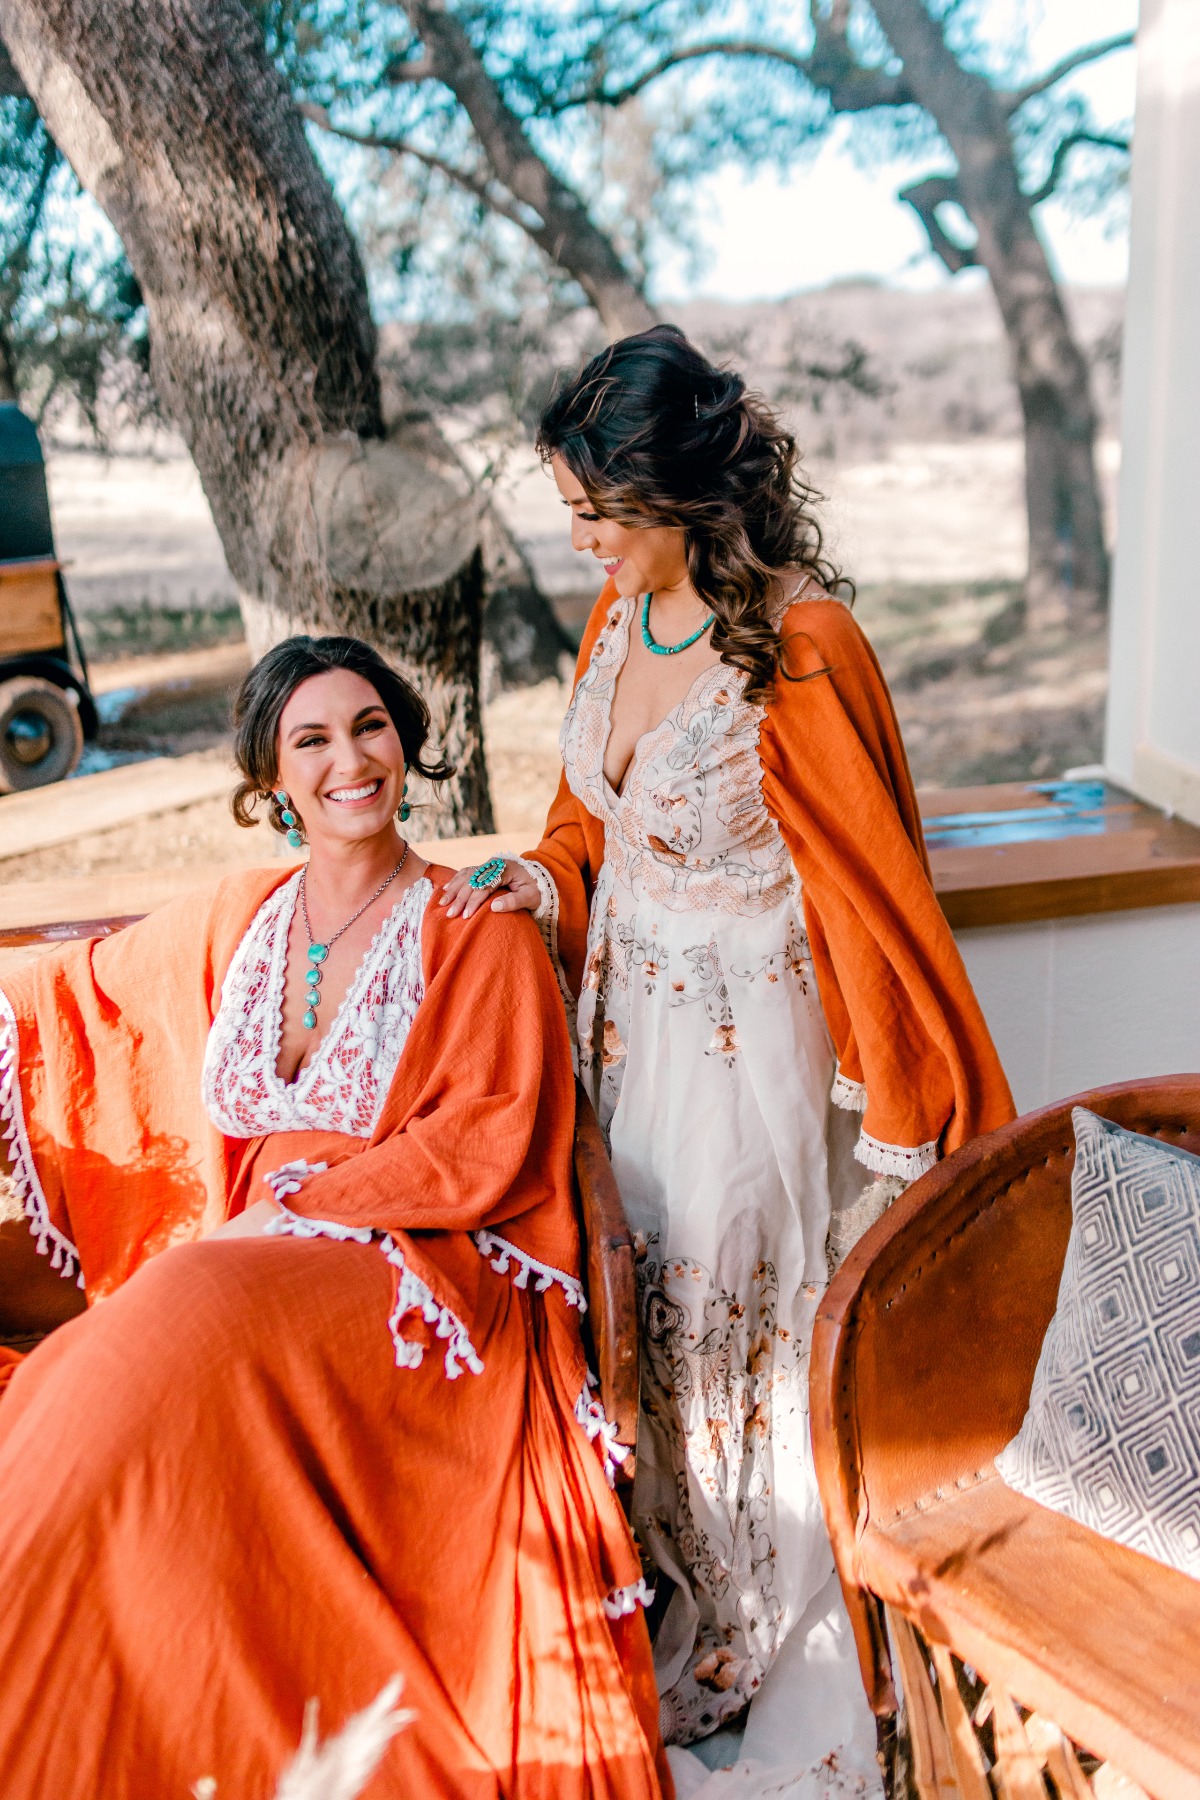 This Texas Team Went All In On The Southwestern Boho Theme For This Stunning Inspiration Shoot